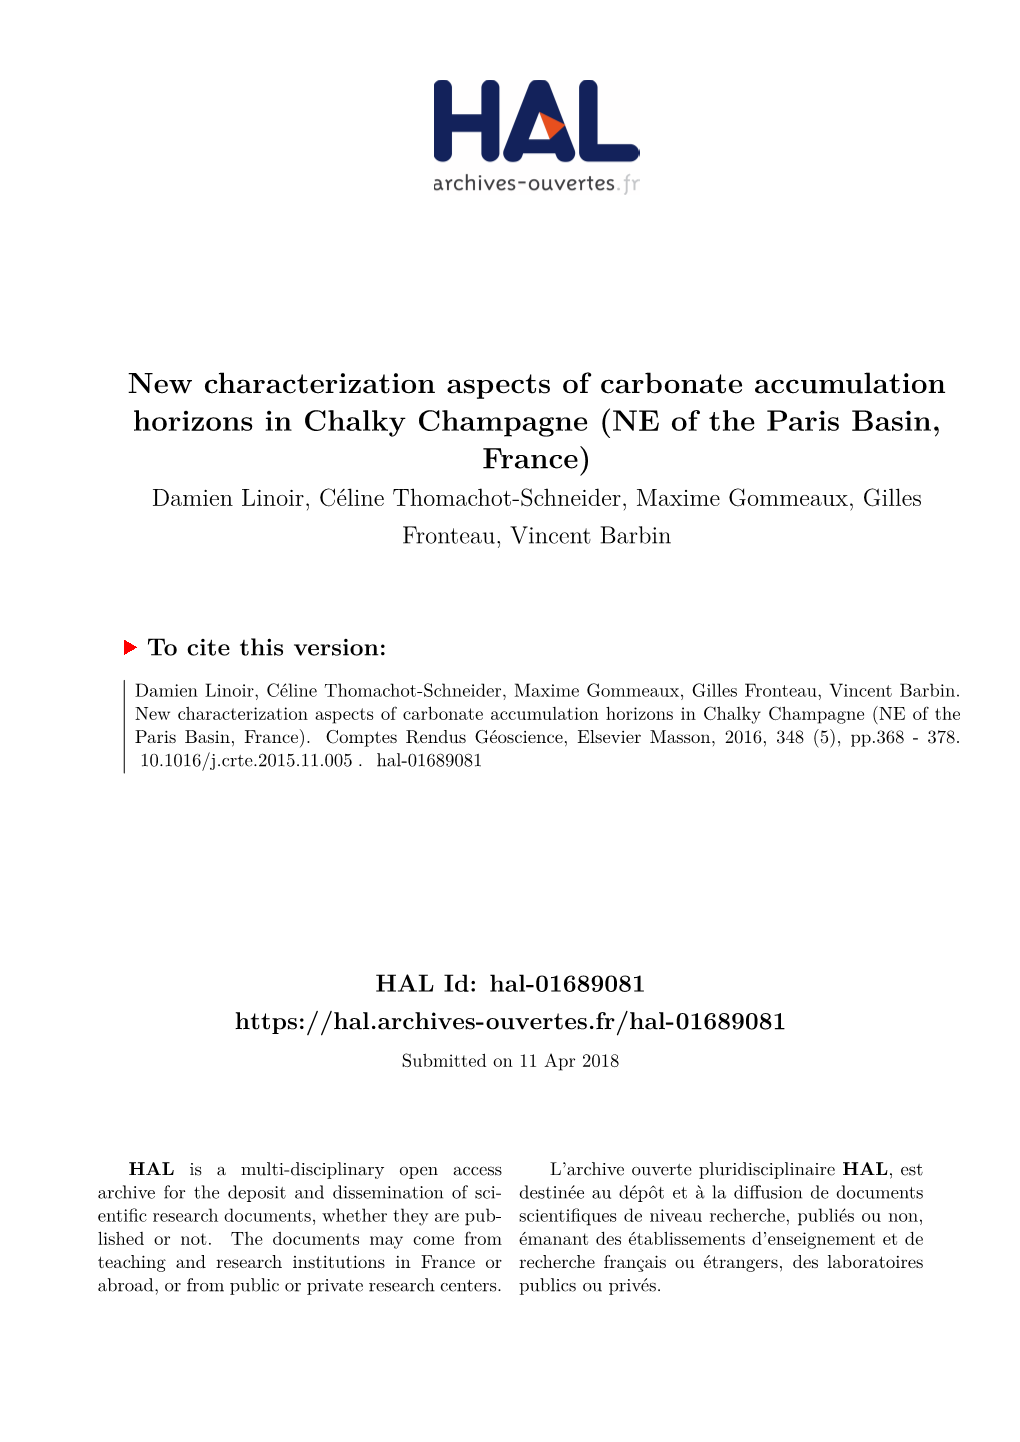 New Characterization Aspects of Carbonate